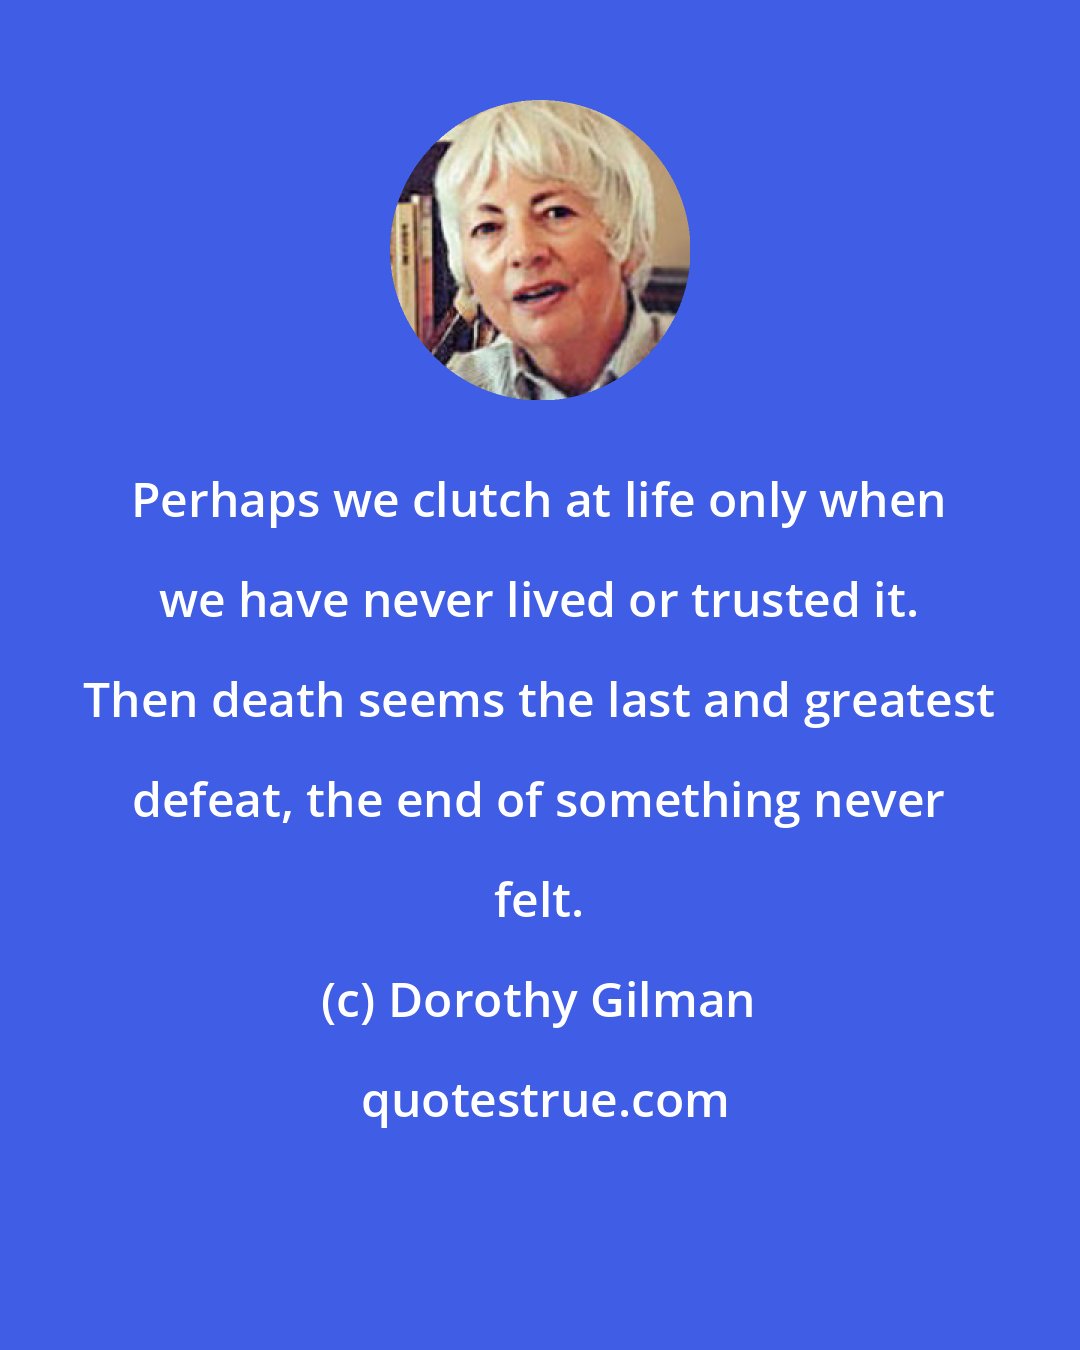 Dorothy Gilman: Perhaps we clutch at life only when we have never lived or trusted it. Then death seems the last and greatest defeat, the end of something never felt.